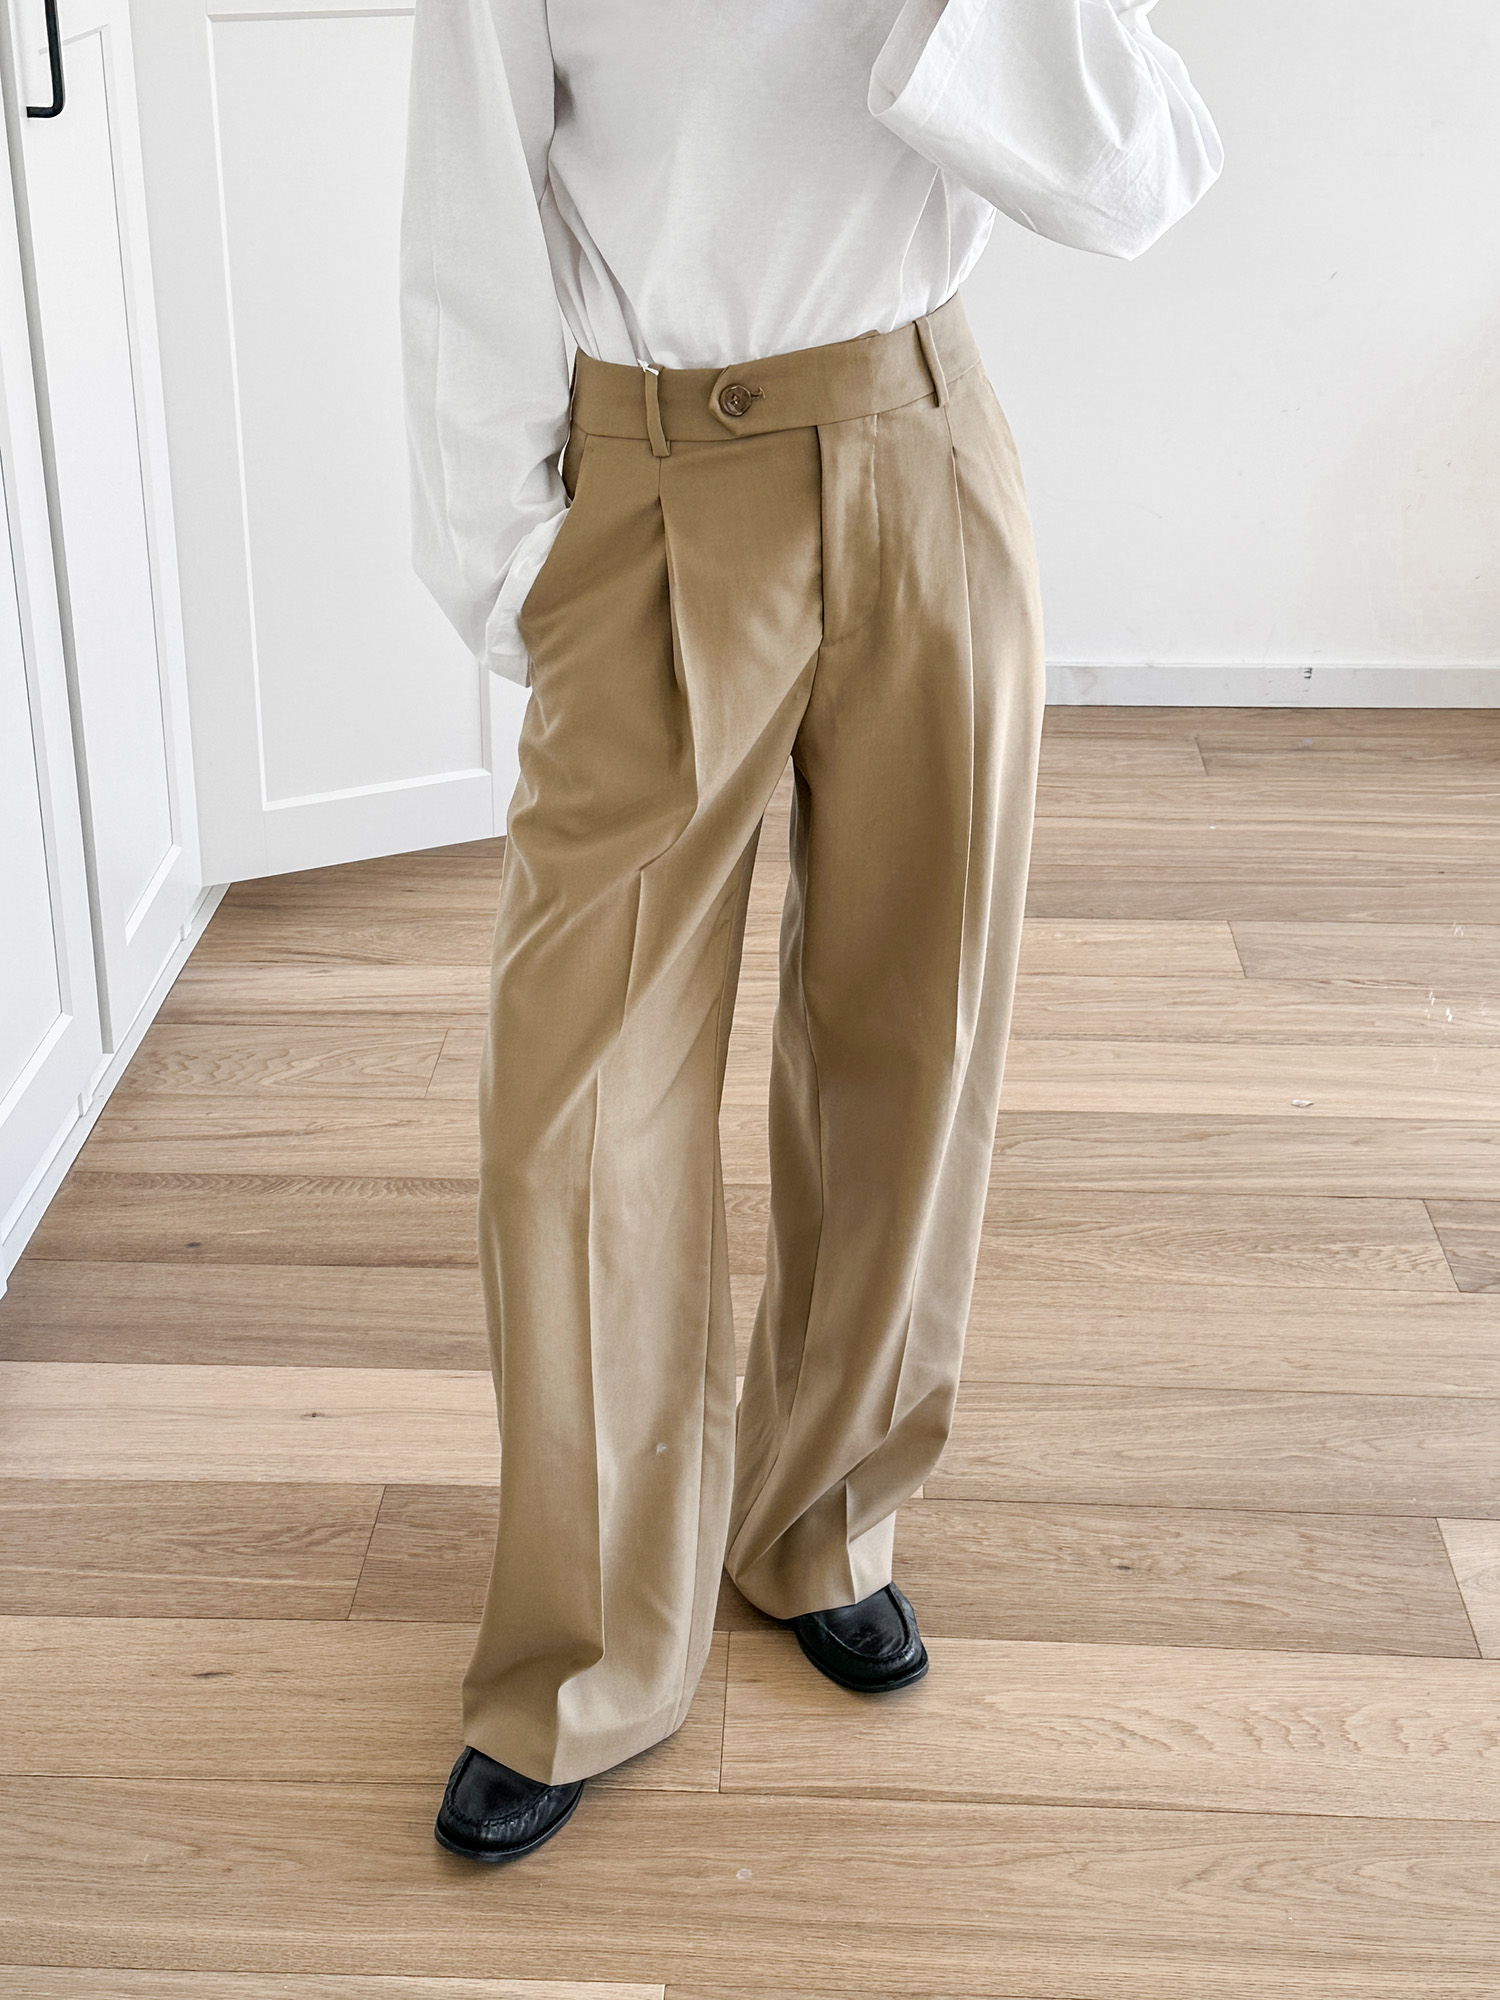 Minimal chic well made tailored wool trousers